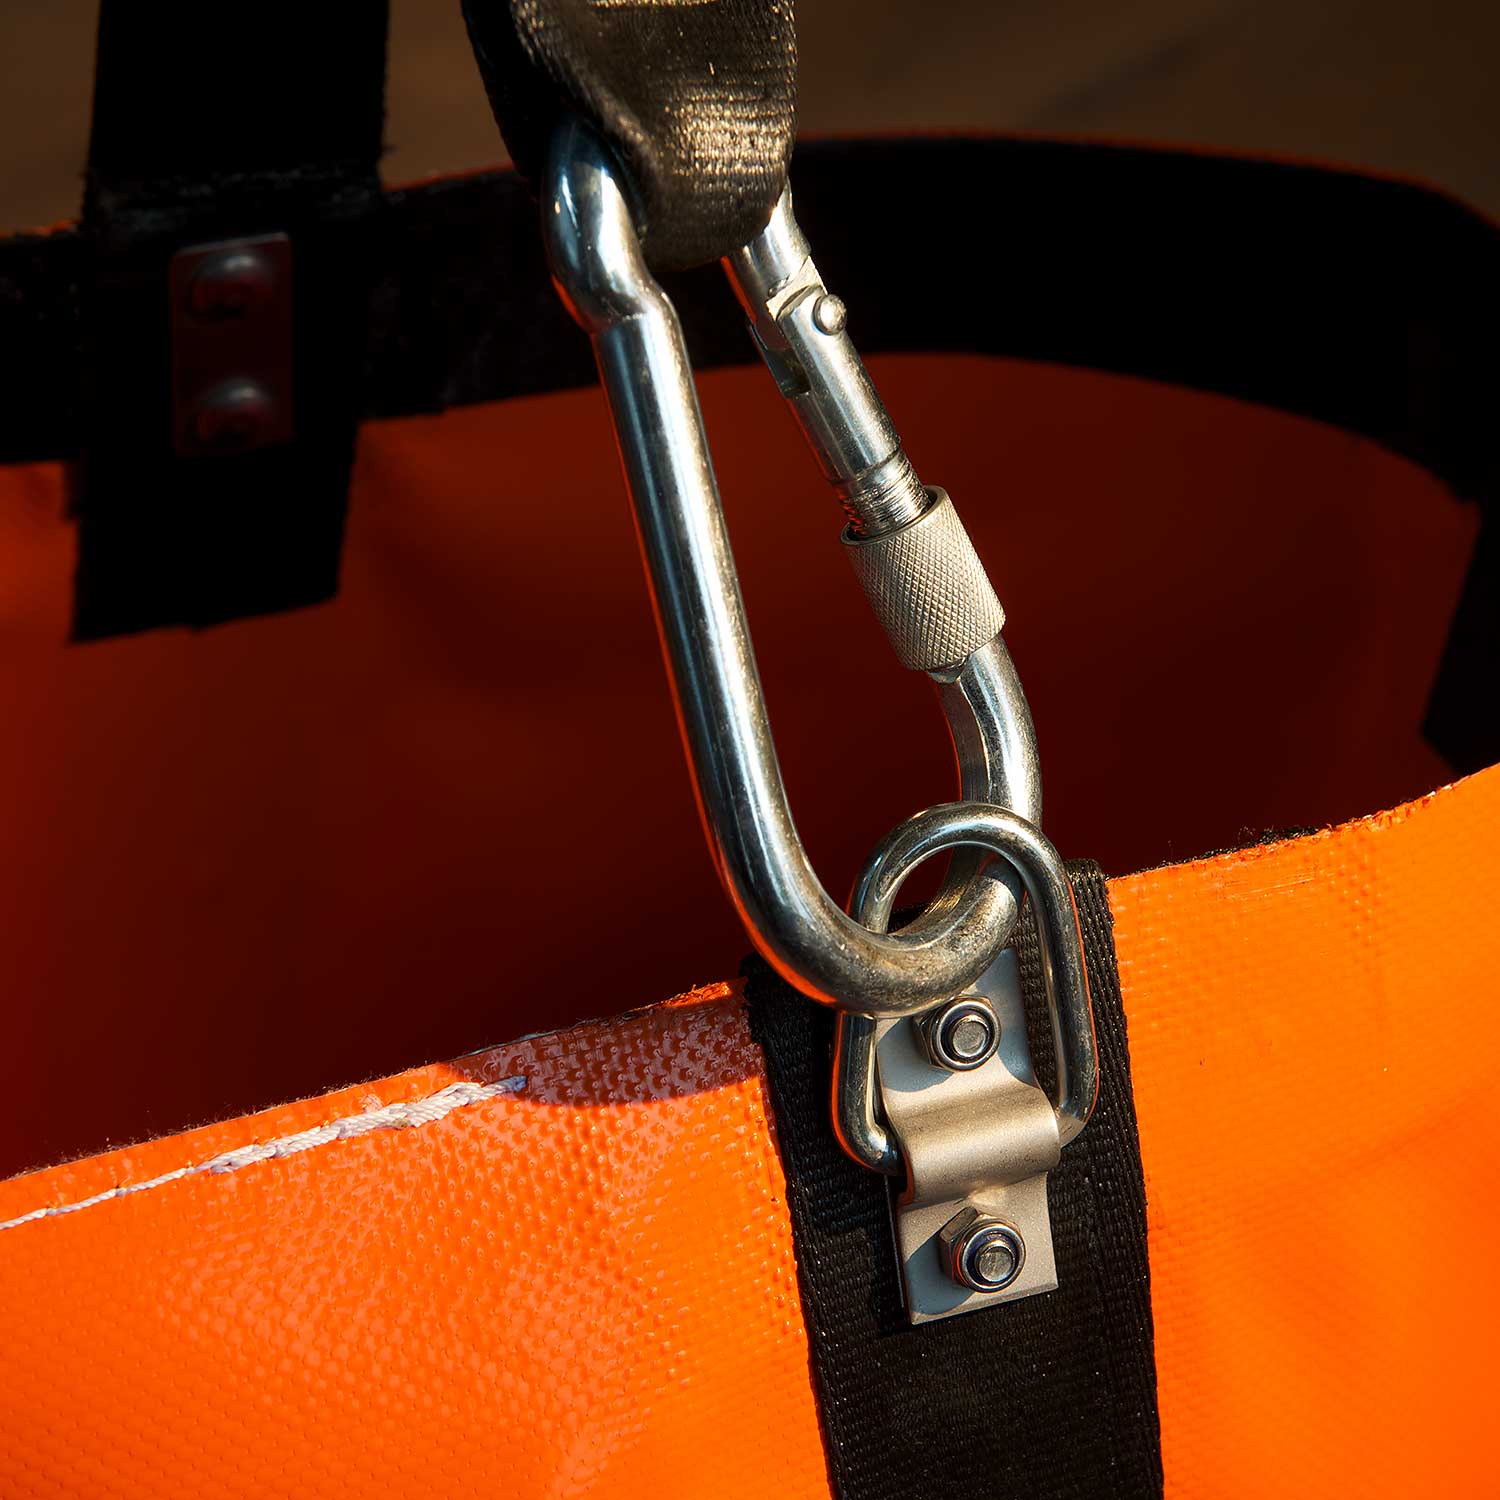 Heavy load bag Model 1 with carabiner hook, technical textiles